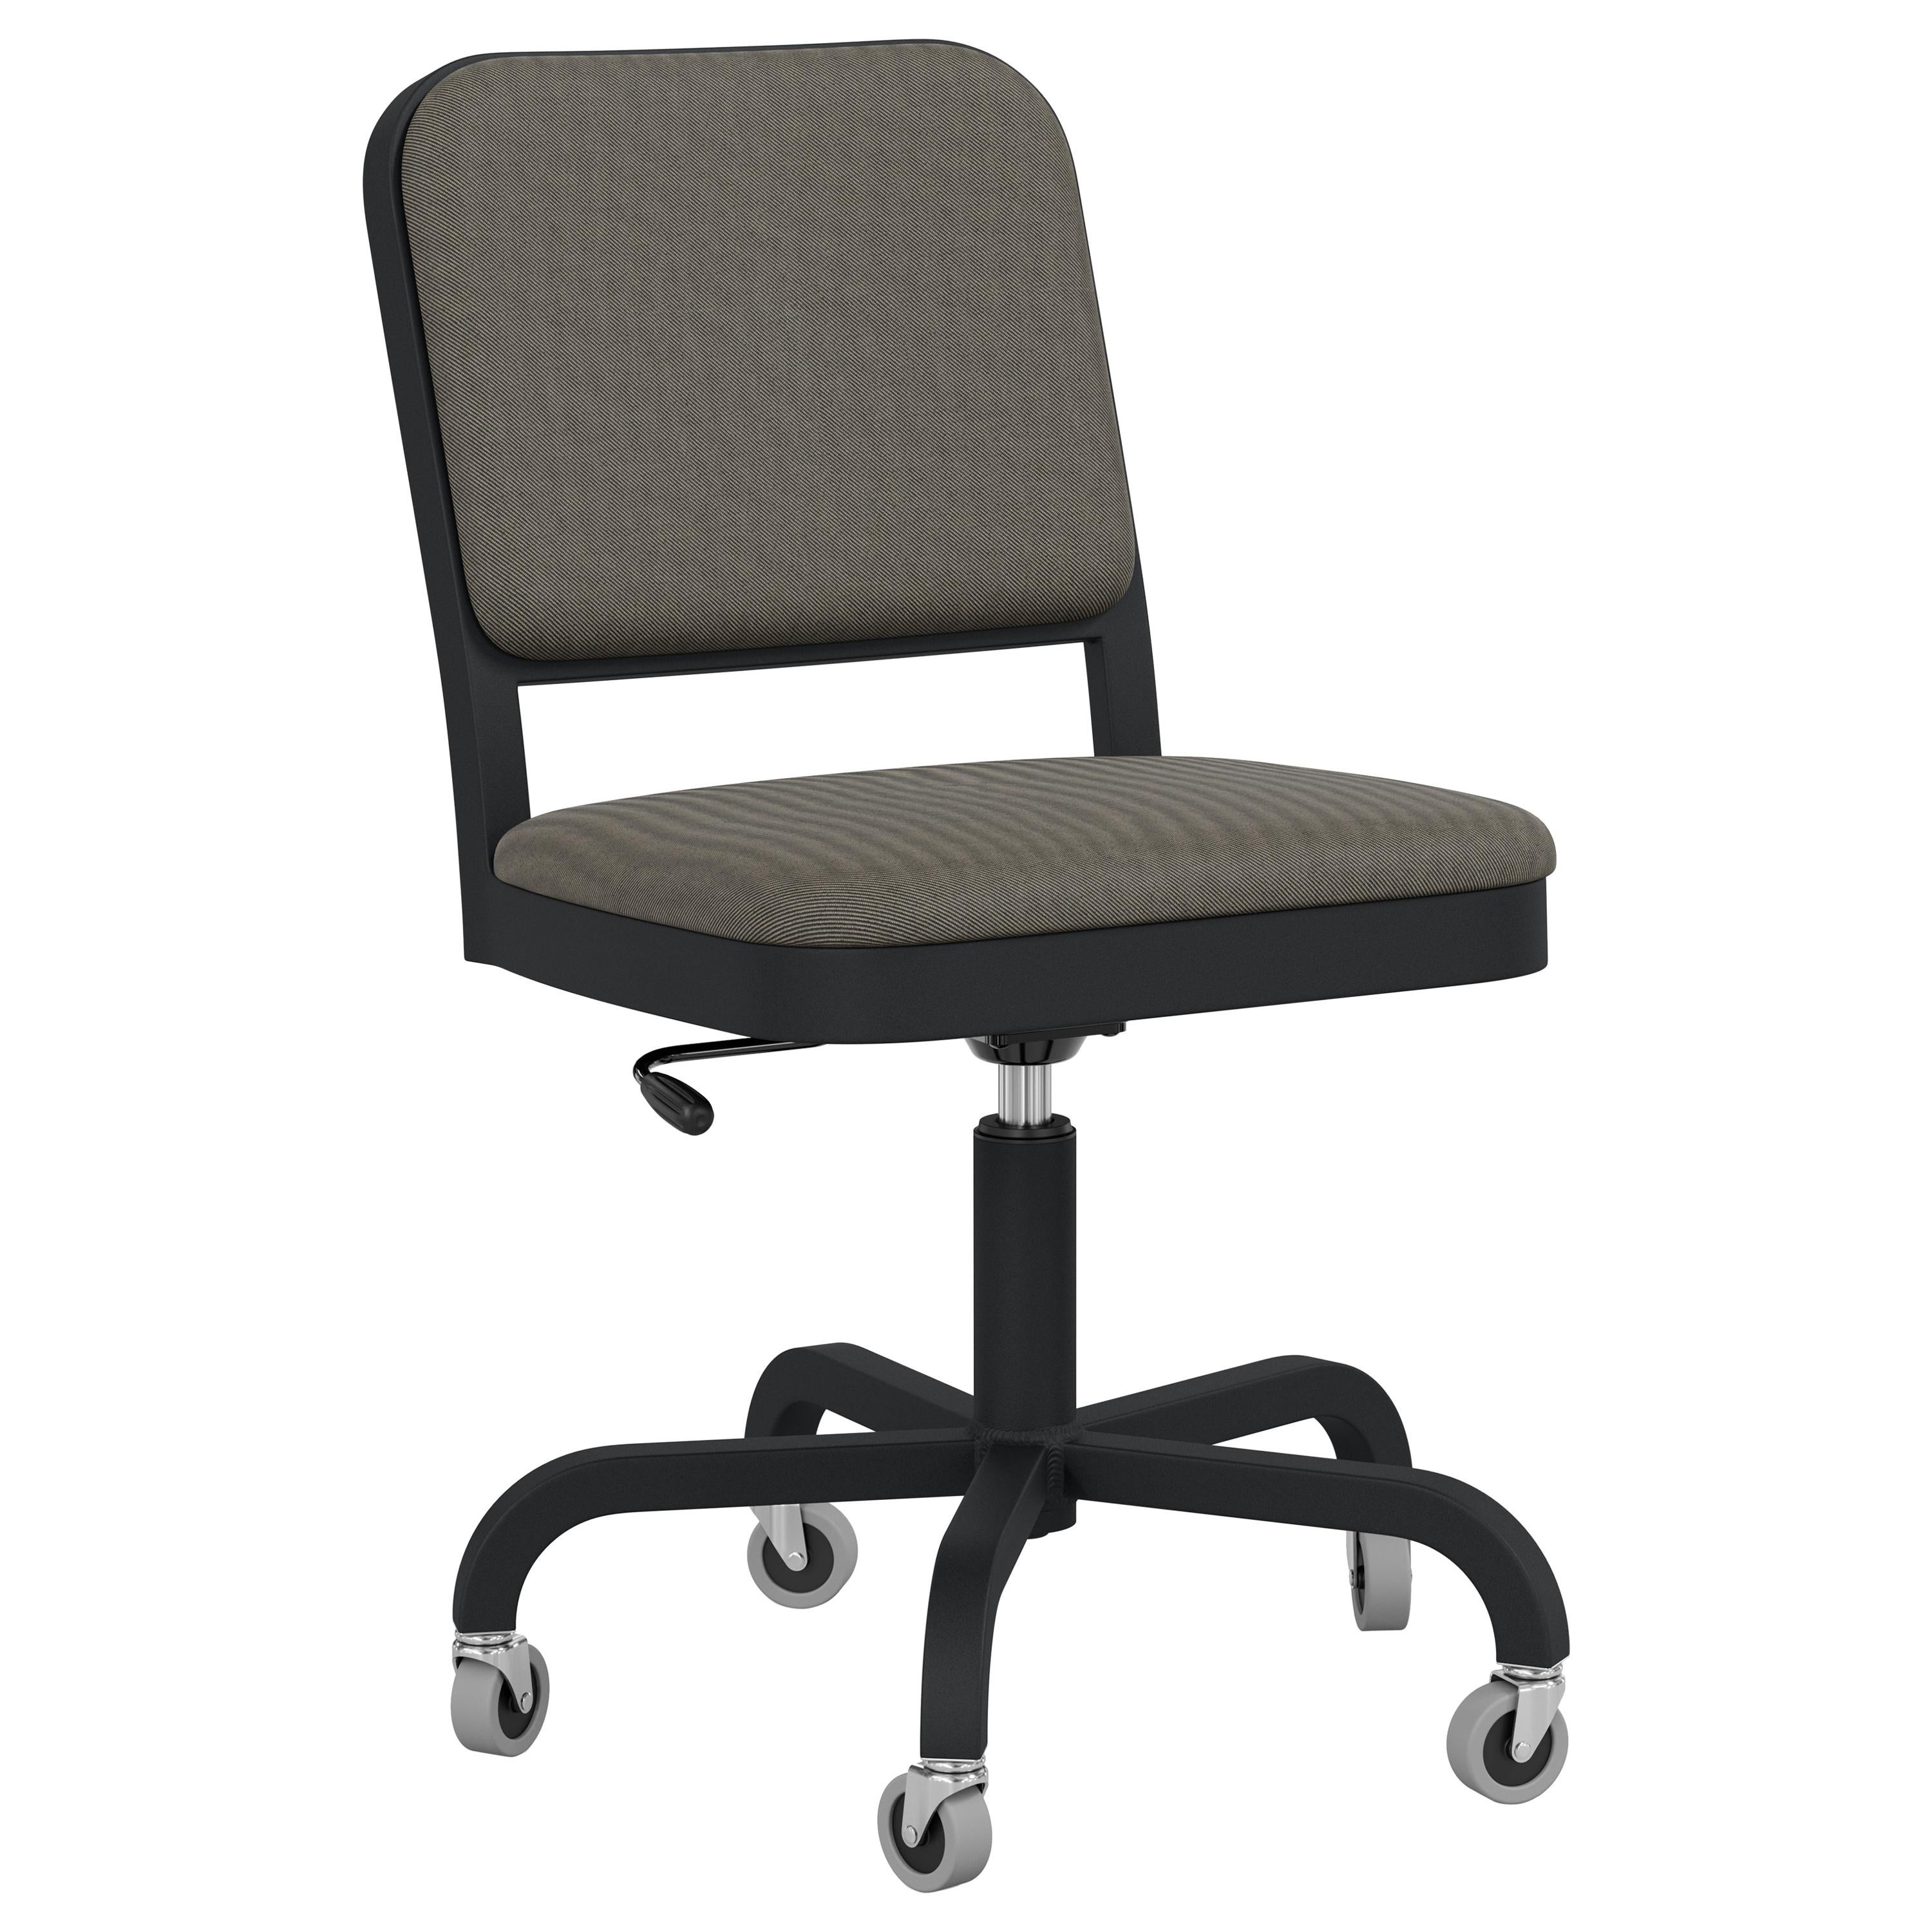 Emeco Navy Officer Swivel Chair in Black Fabric with Black Powder Coated Frame For Sale